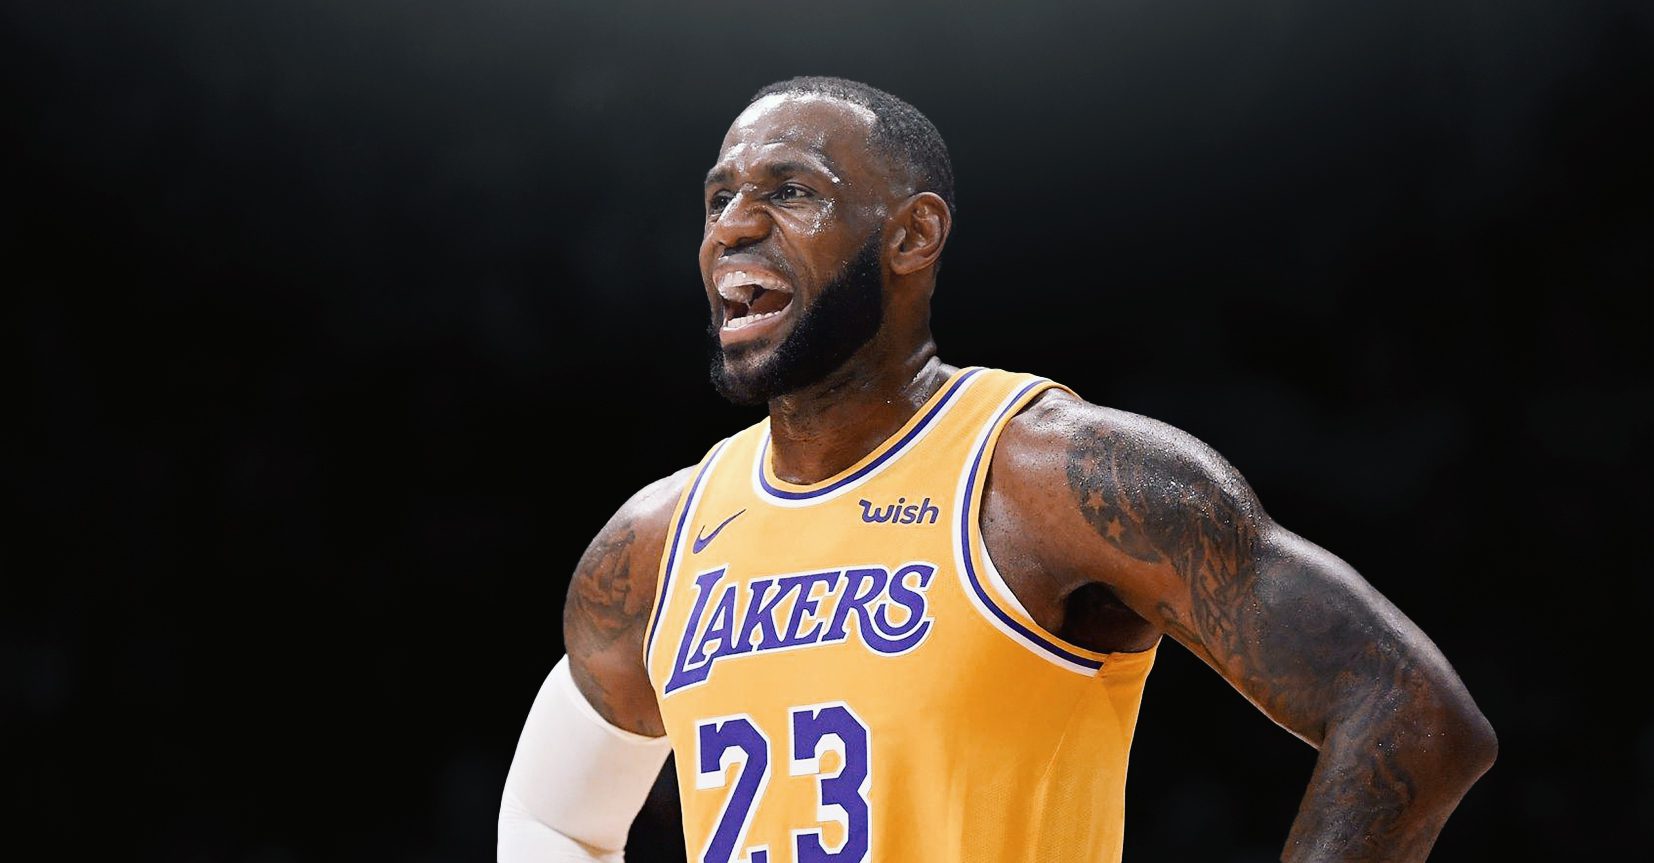 LeBron James Called Out for Discrediting Miami’s Impact On His Career